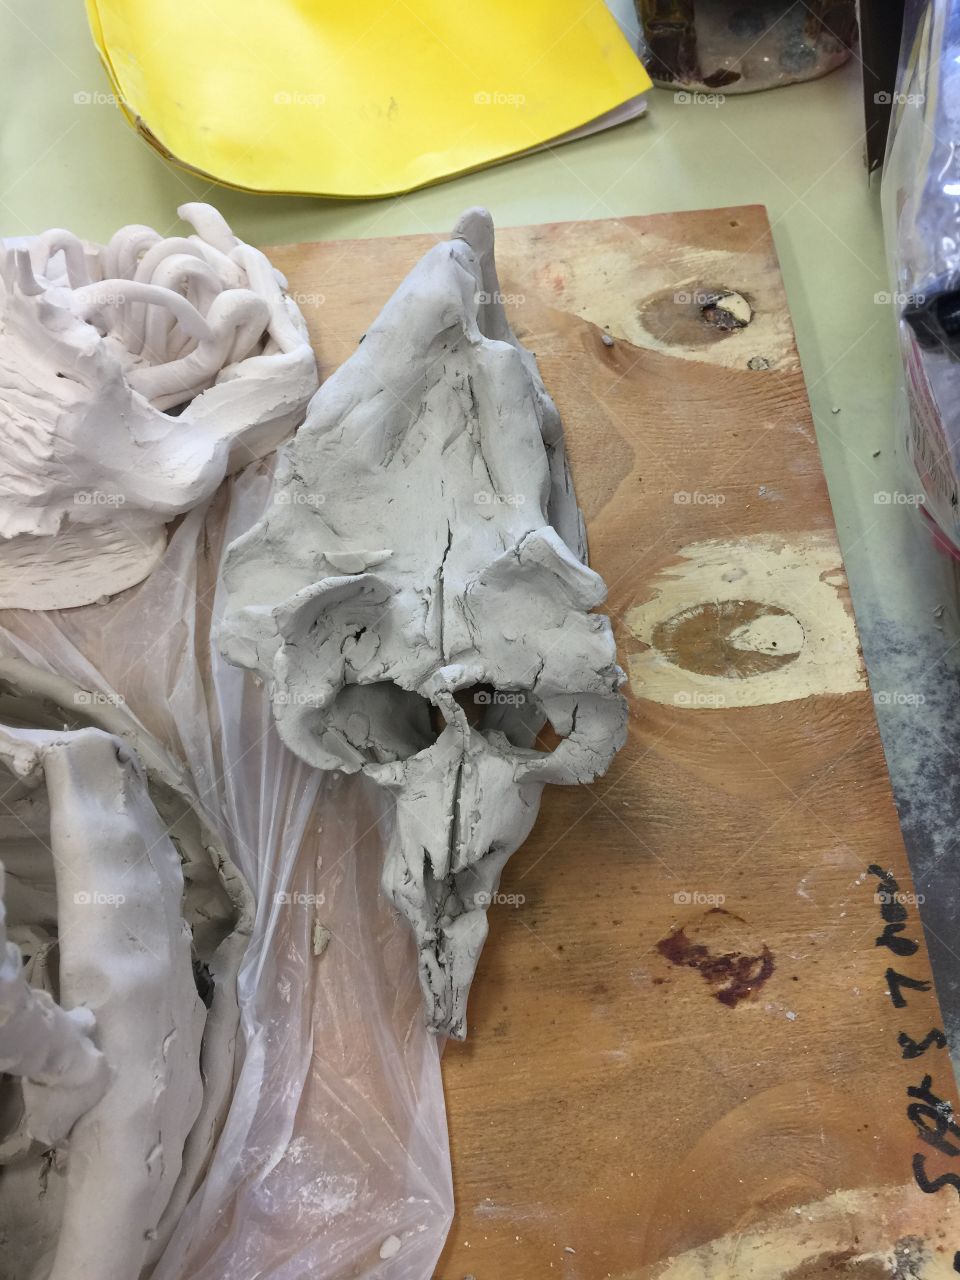 A rodent skull that I had created out of clay in cermic class.